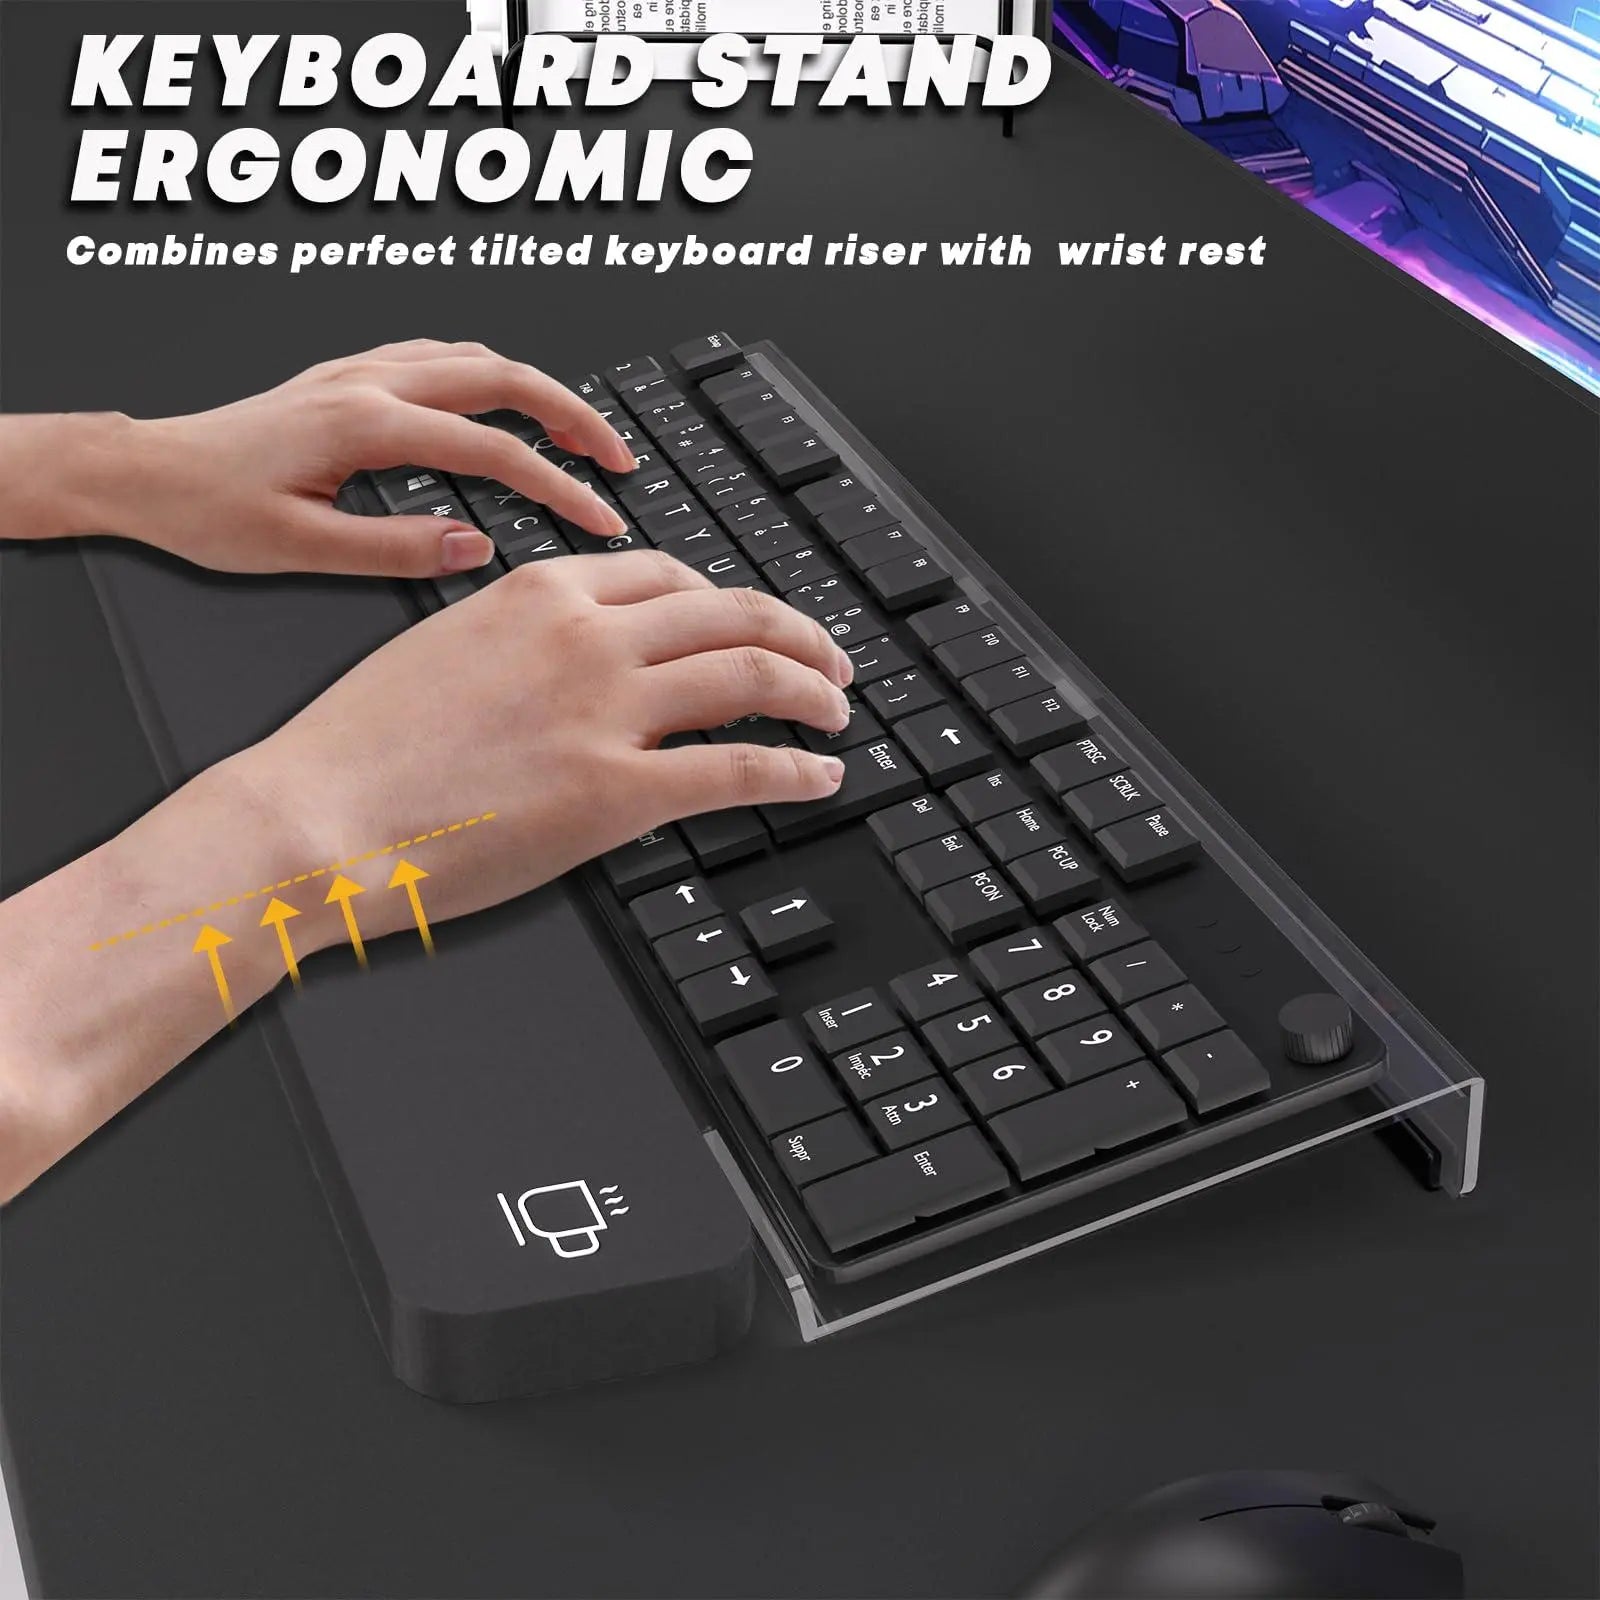 PUTORSEN  Computer Keyboard Stand Acrylic,Tilted Keyboard Tray with Keyboard Wrist Rest for Better Ergonomic Typing,Keyboard Riser with Anti-Slip Fits Most Keyboards for Office Desk, Home,School PUTORSEN